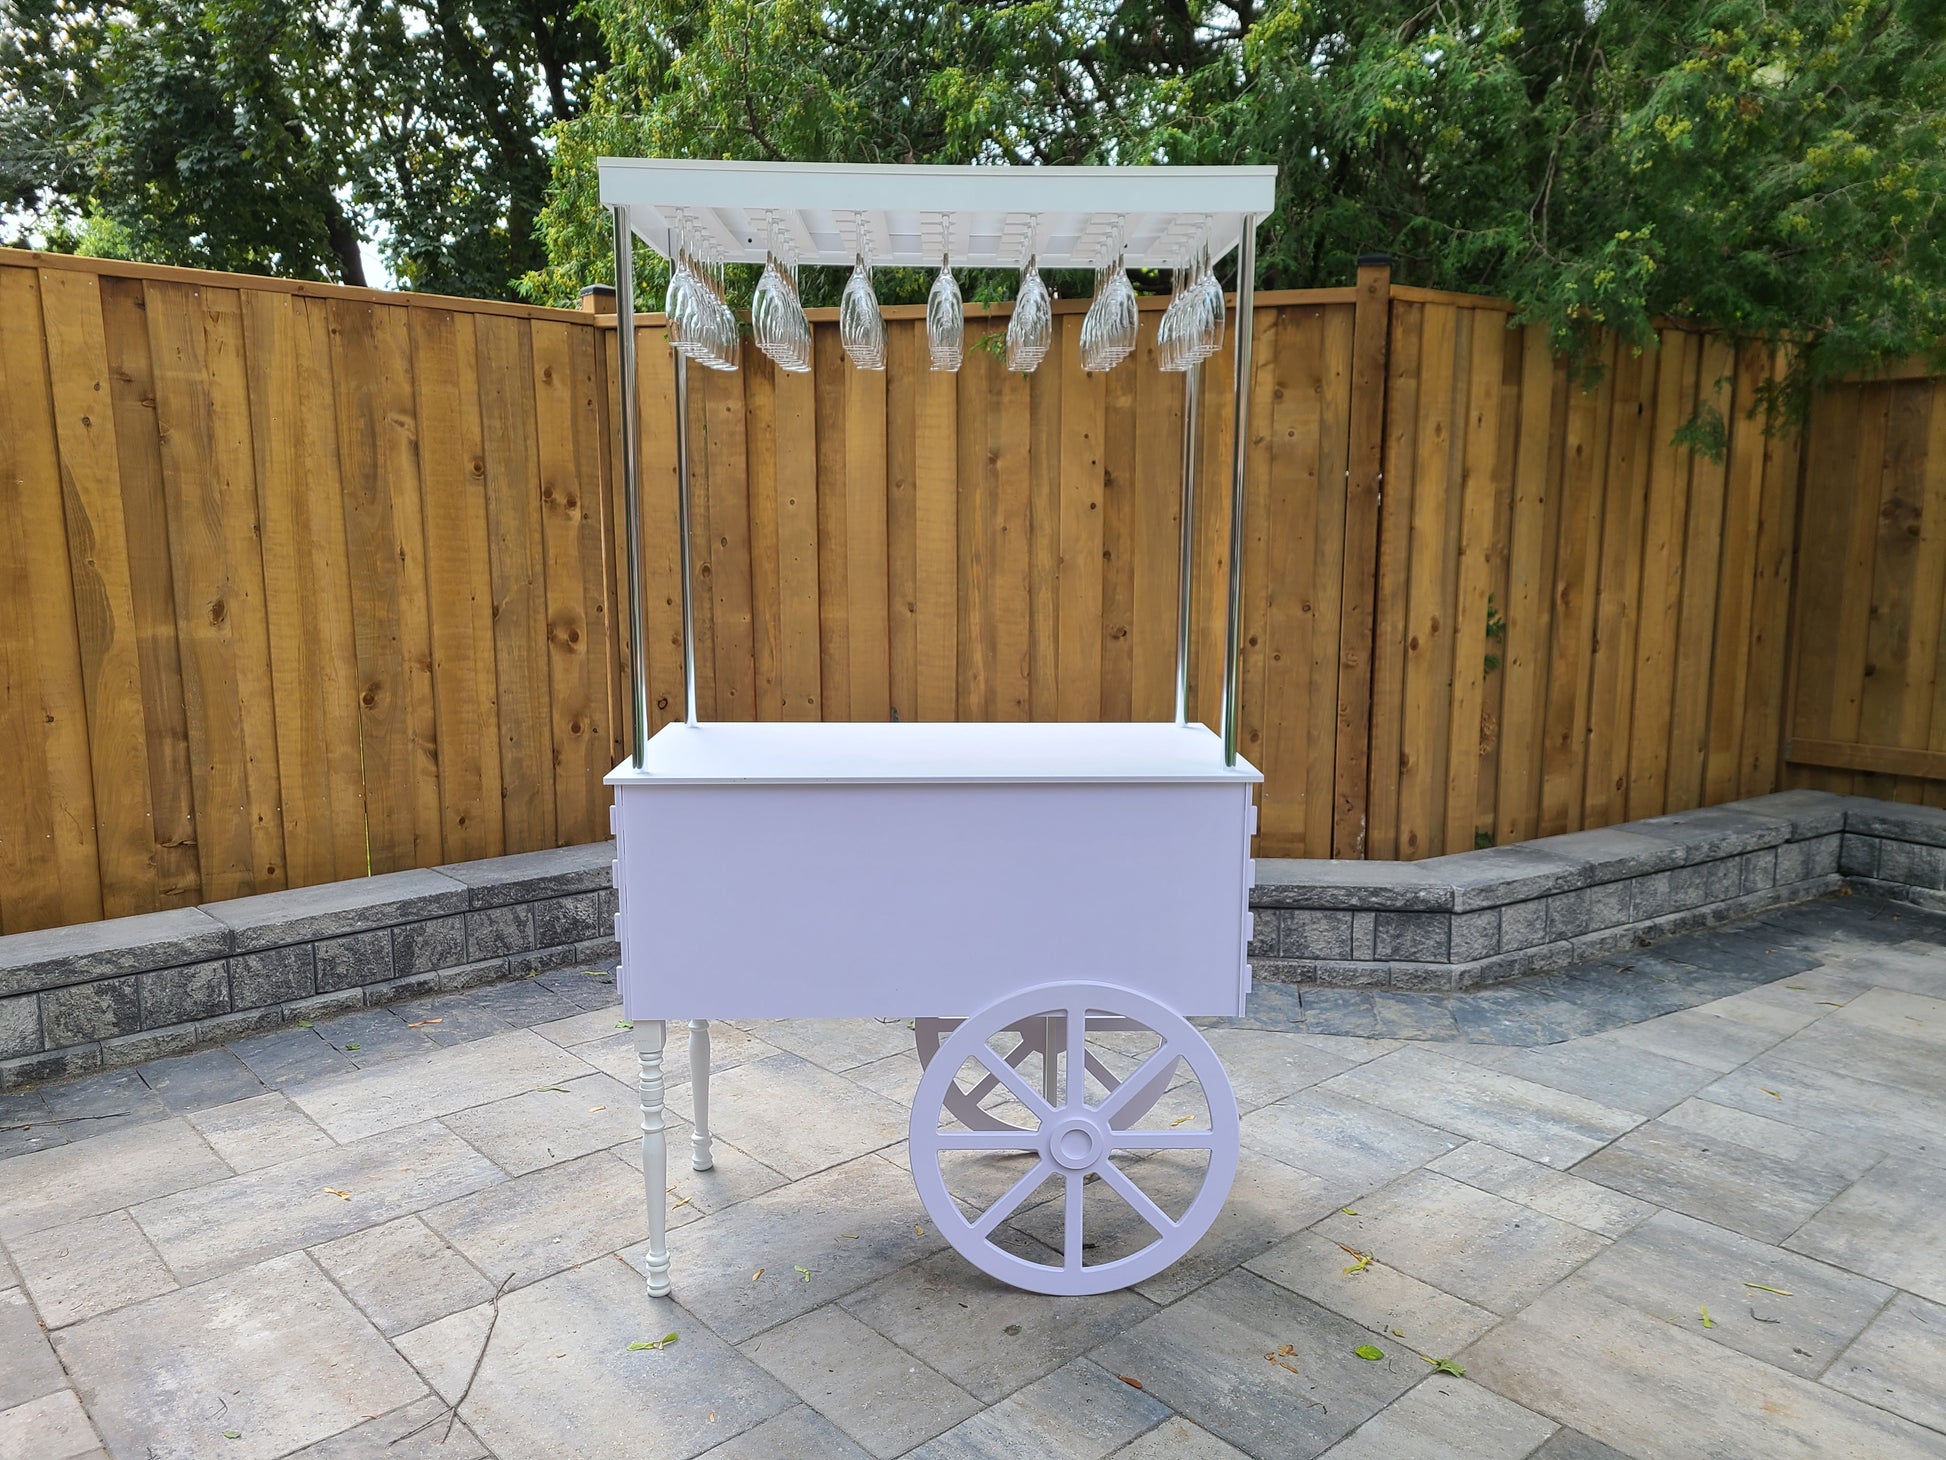 Mobile bar cart, drink cart, party decor, wedding decorations, champagne display, event bar, collapsible bar cart, white PVC bar cart, Toronto-made party supplies